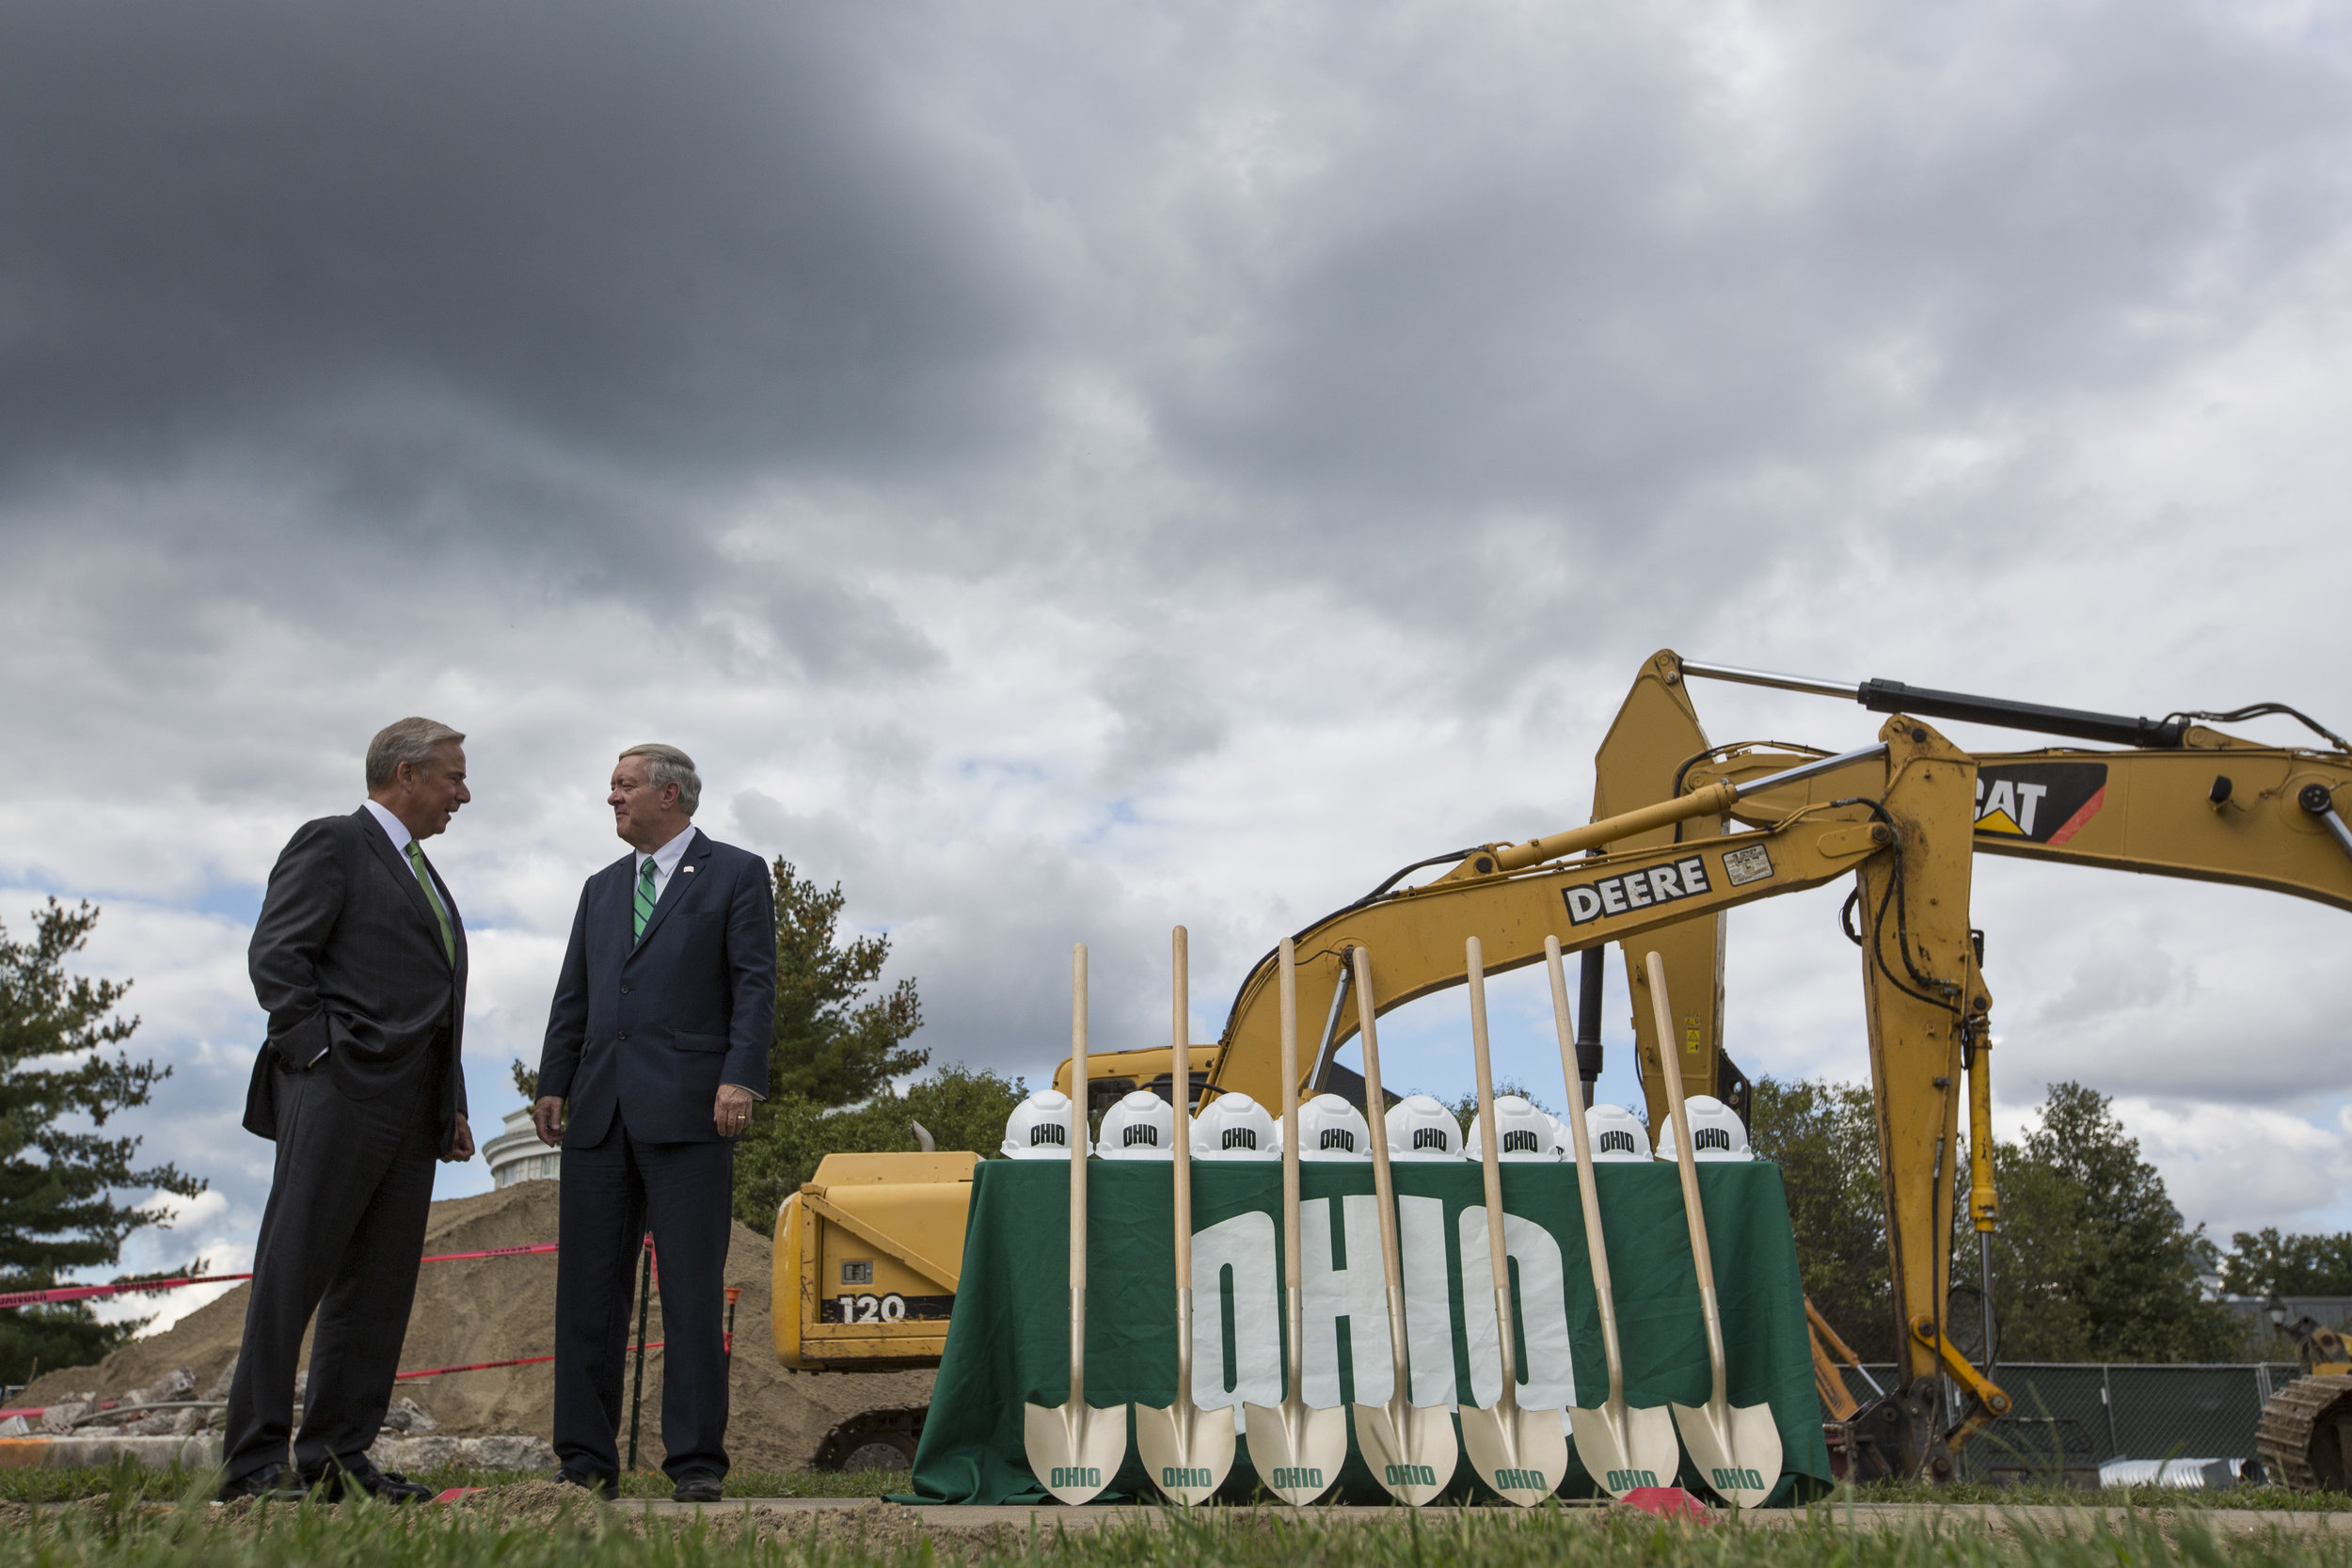  Perry Sook and Ohio University President Duane Nellis talk before the groundbreaking ceremony of the Perry and Sandy Sook Academic Center for student-athletes on September 15, 2017. 